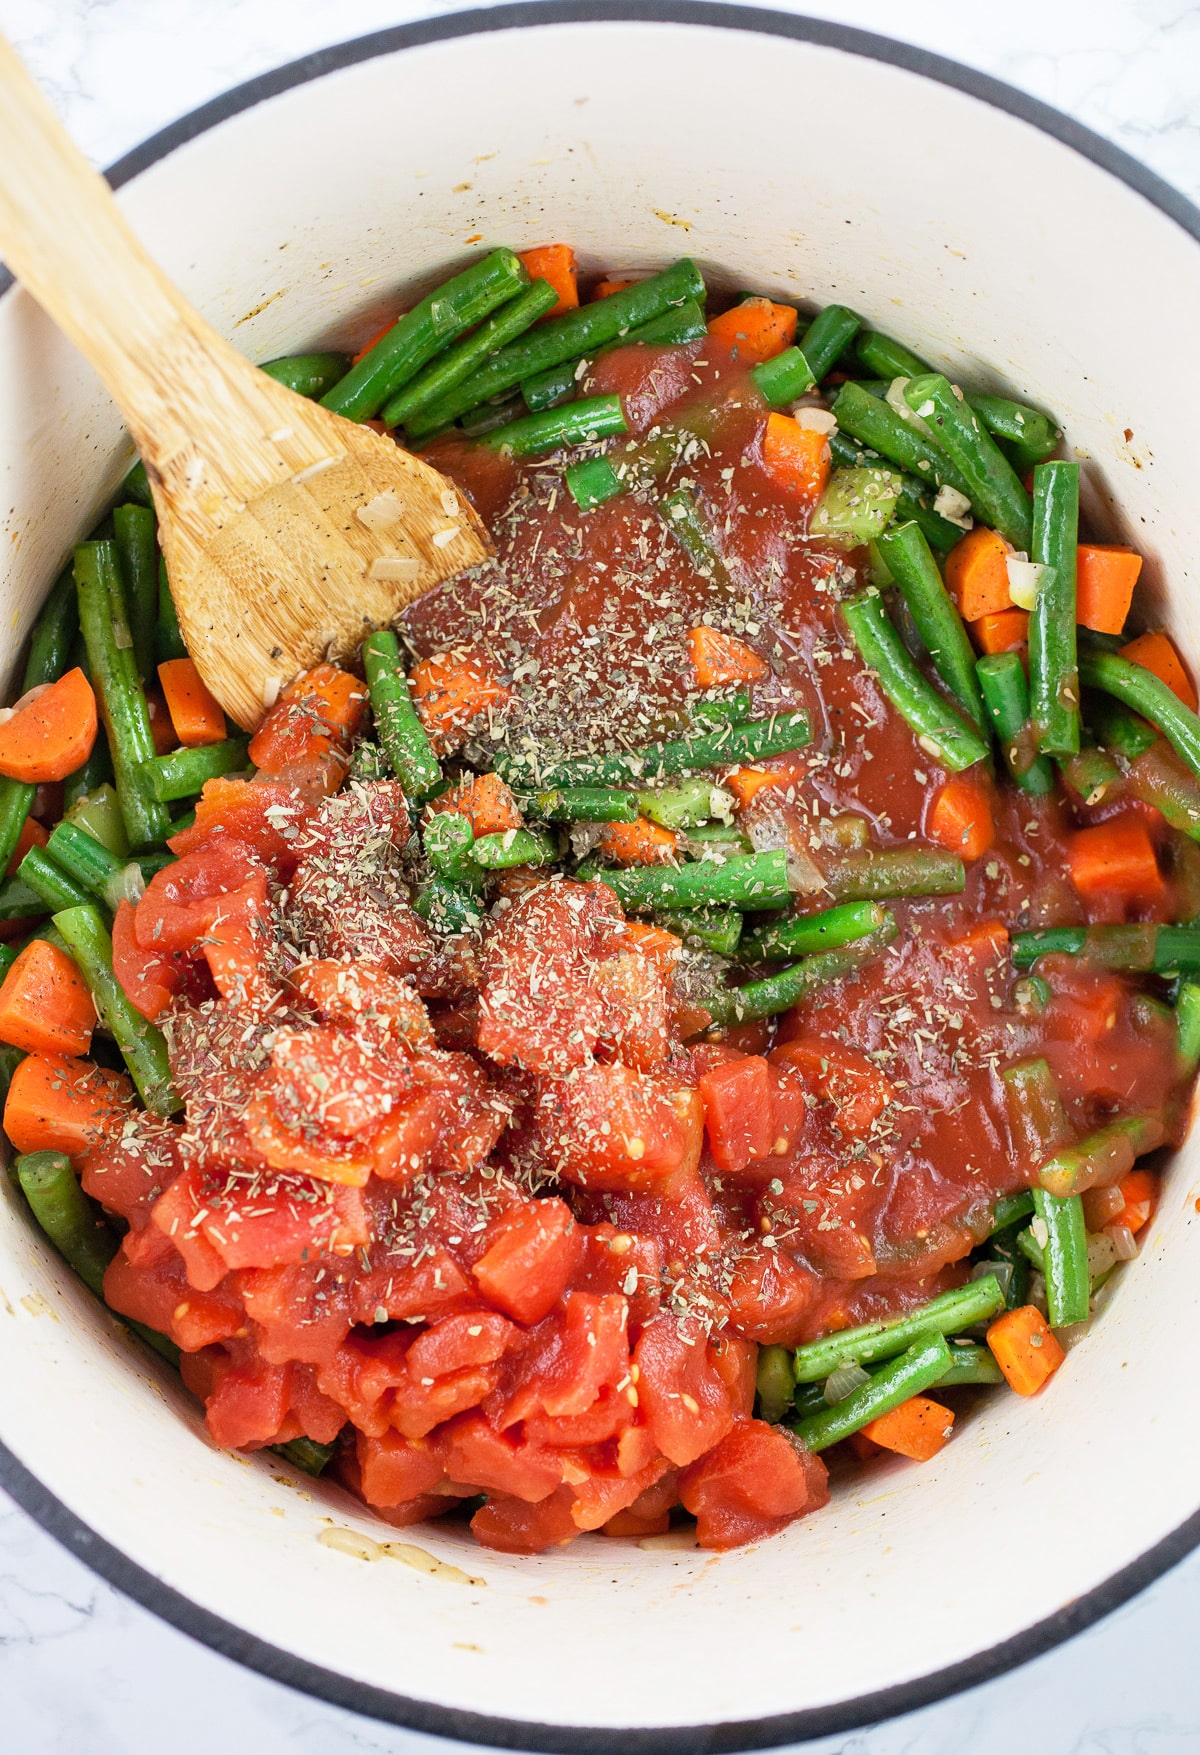 Diced tomatoes, tomato sauce, and Italian seasoning added to vegetables in Dutch oven with wooden spoon.